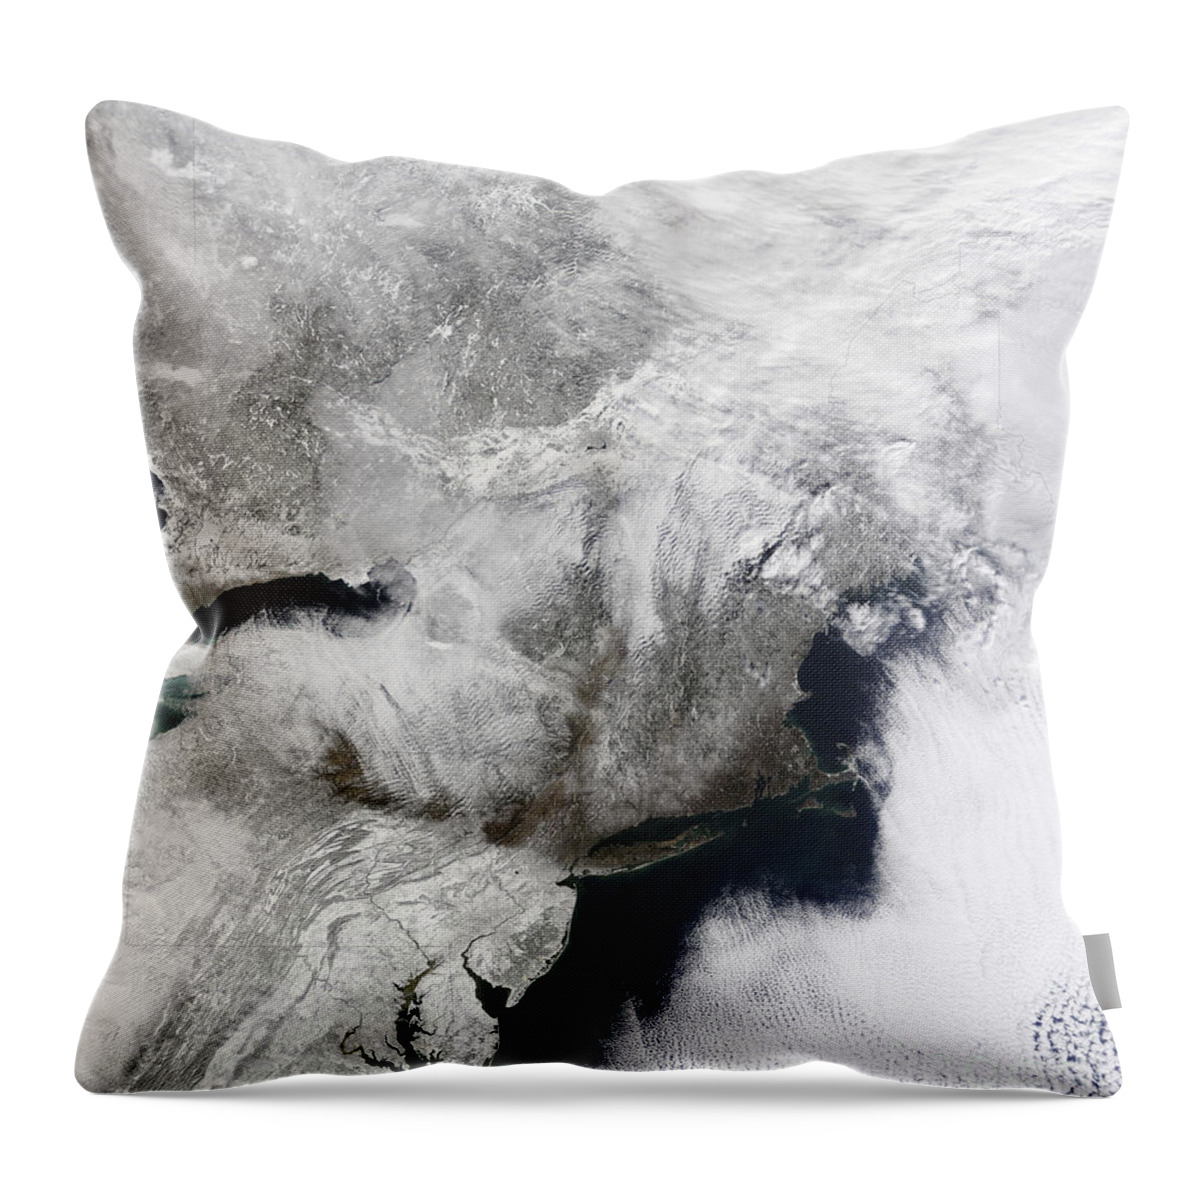 Snowmageddon Throw Pillow featuring the photograph A Severe Winter Storm by Stocktrek Images